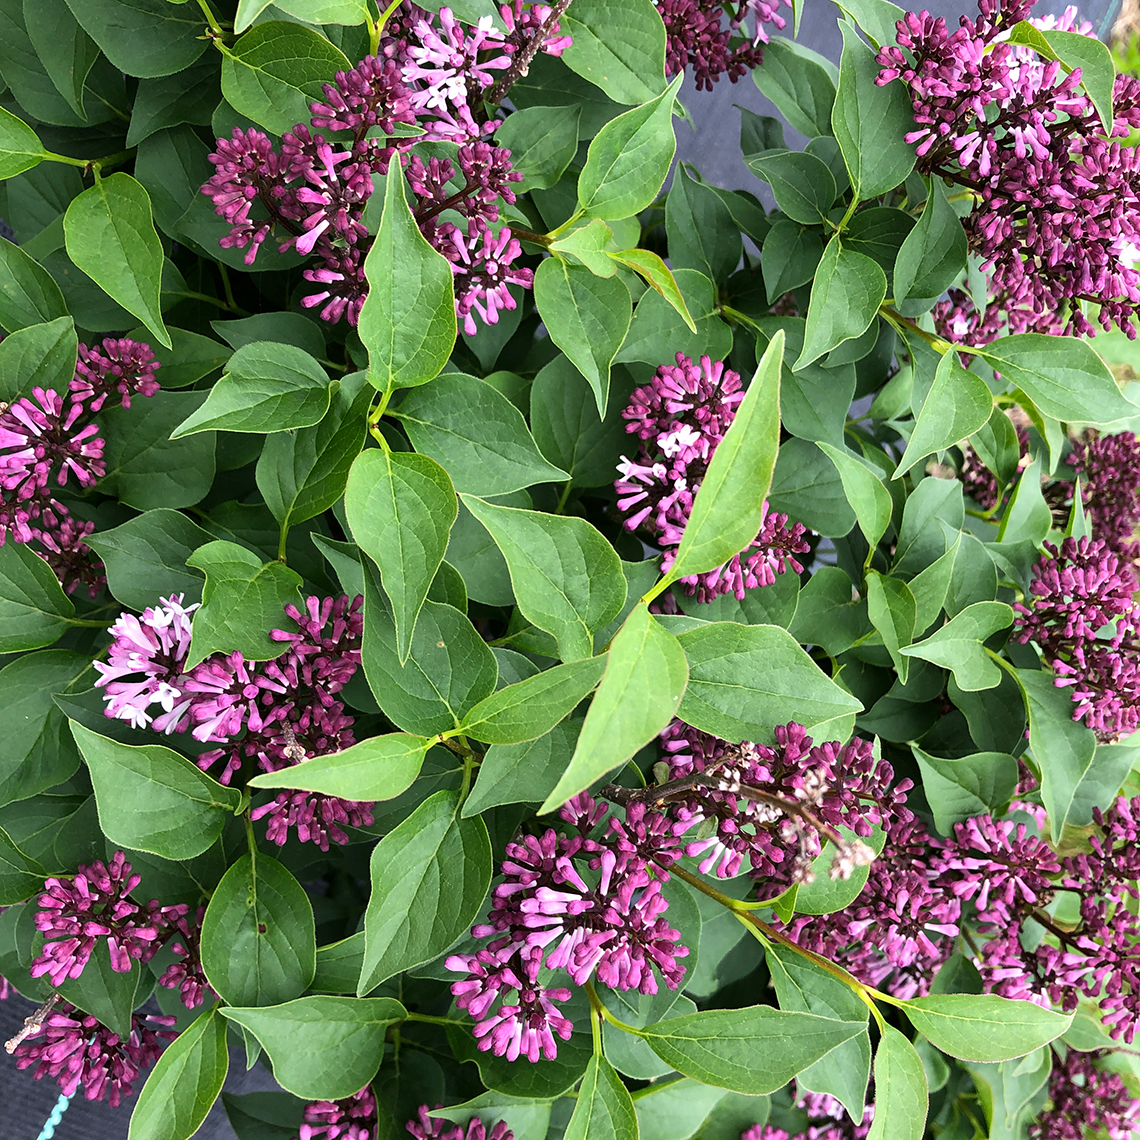 Baby Kim lilac in bloom with purple flowers and clean green foliage